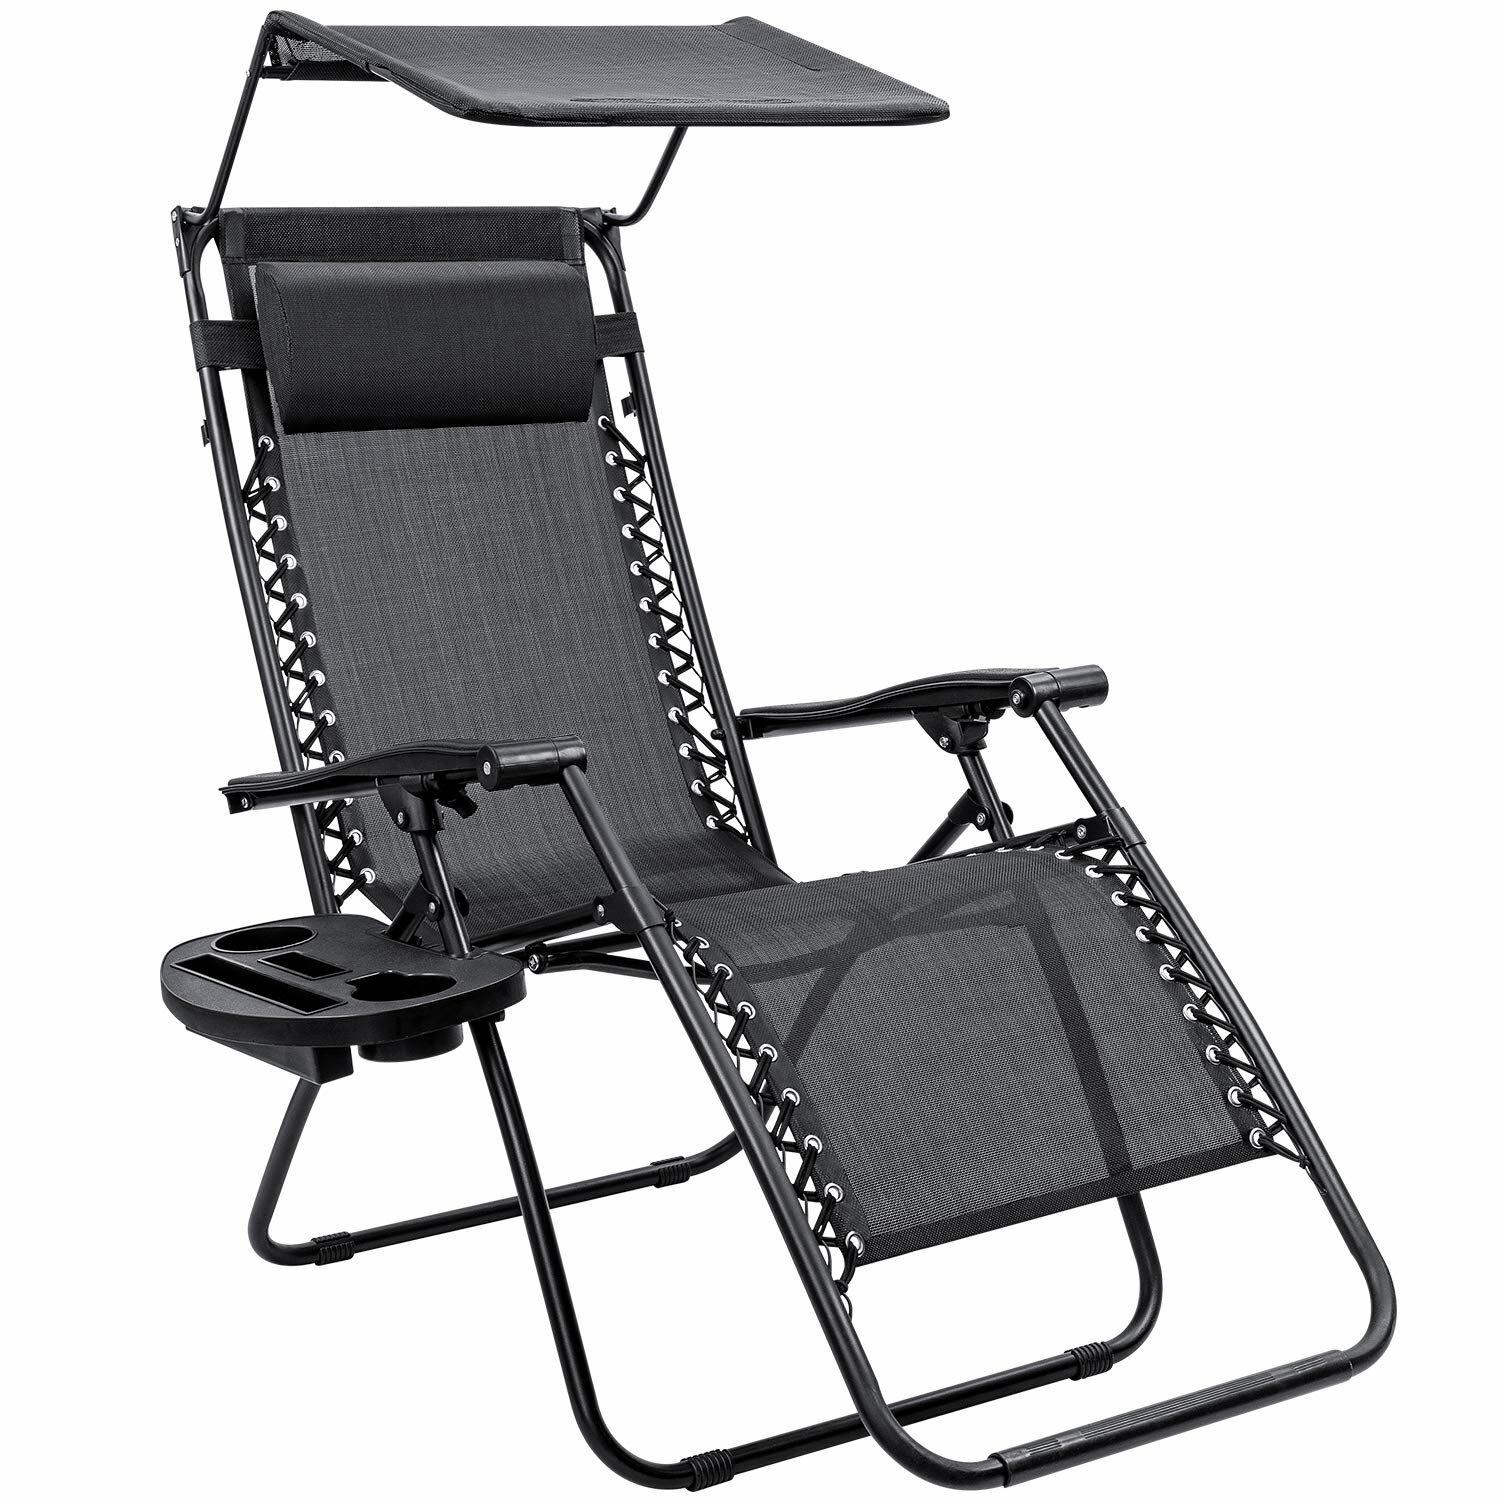 Sorenson Reclining/Folding Zero Gravity Chair with Cushion, The gravity chair is light enough that you can take everywhere., Reclining - image 3 of 4